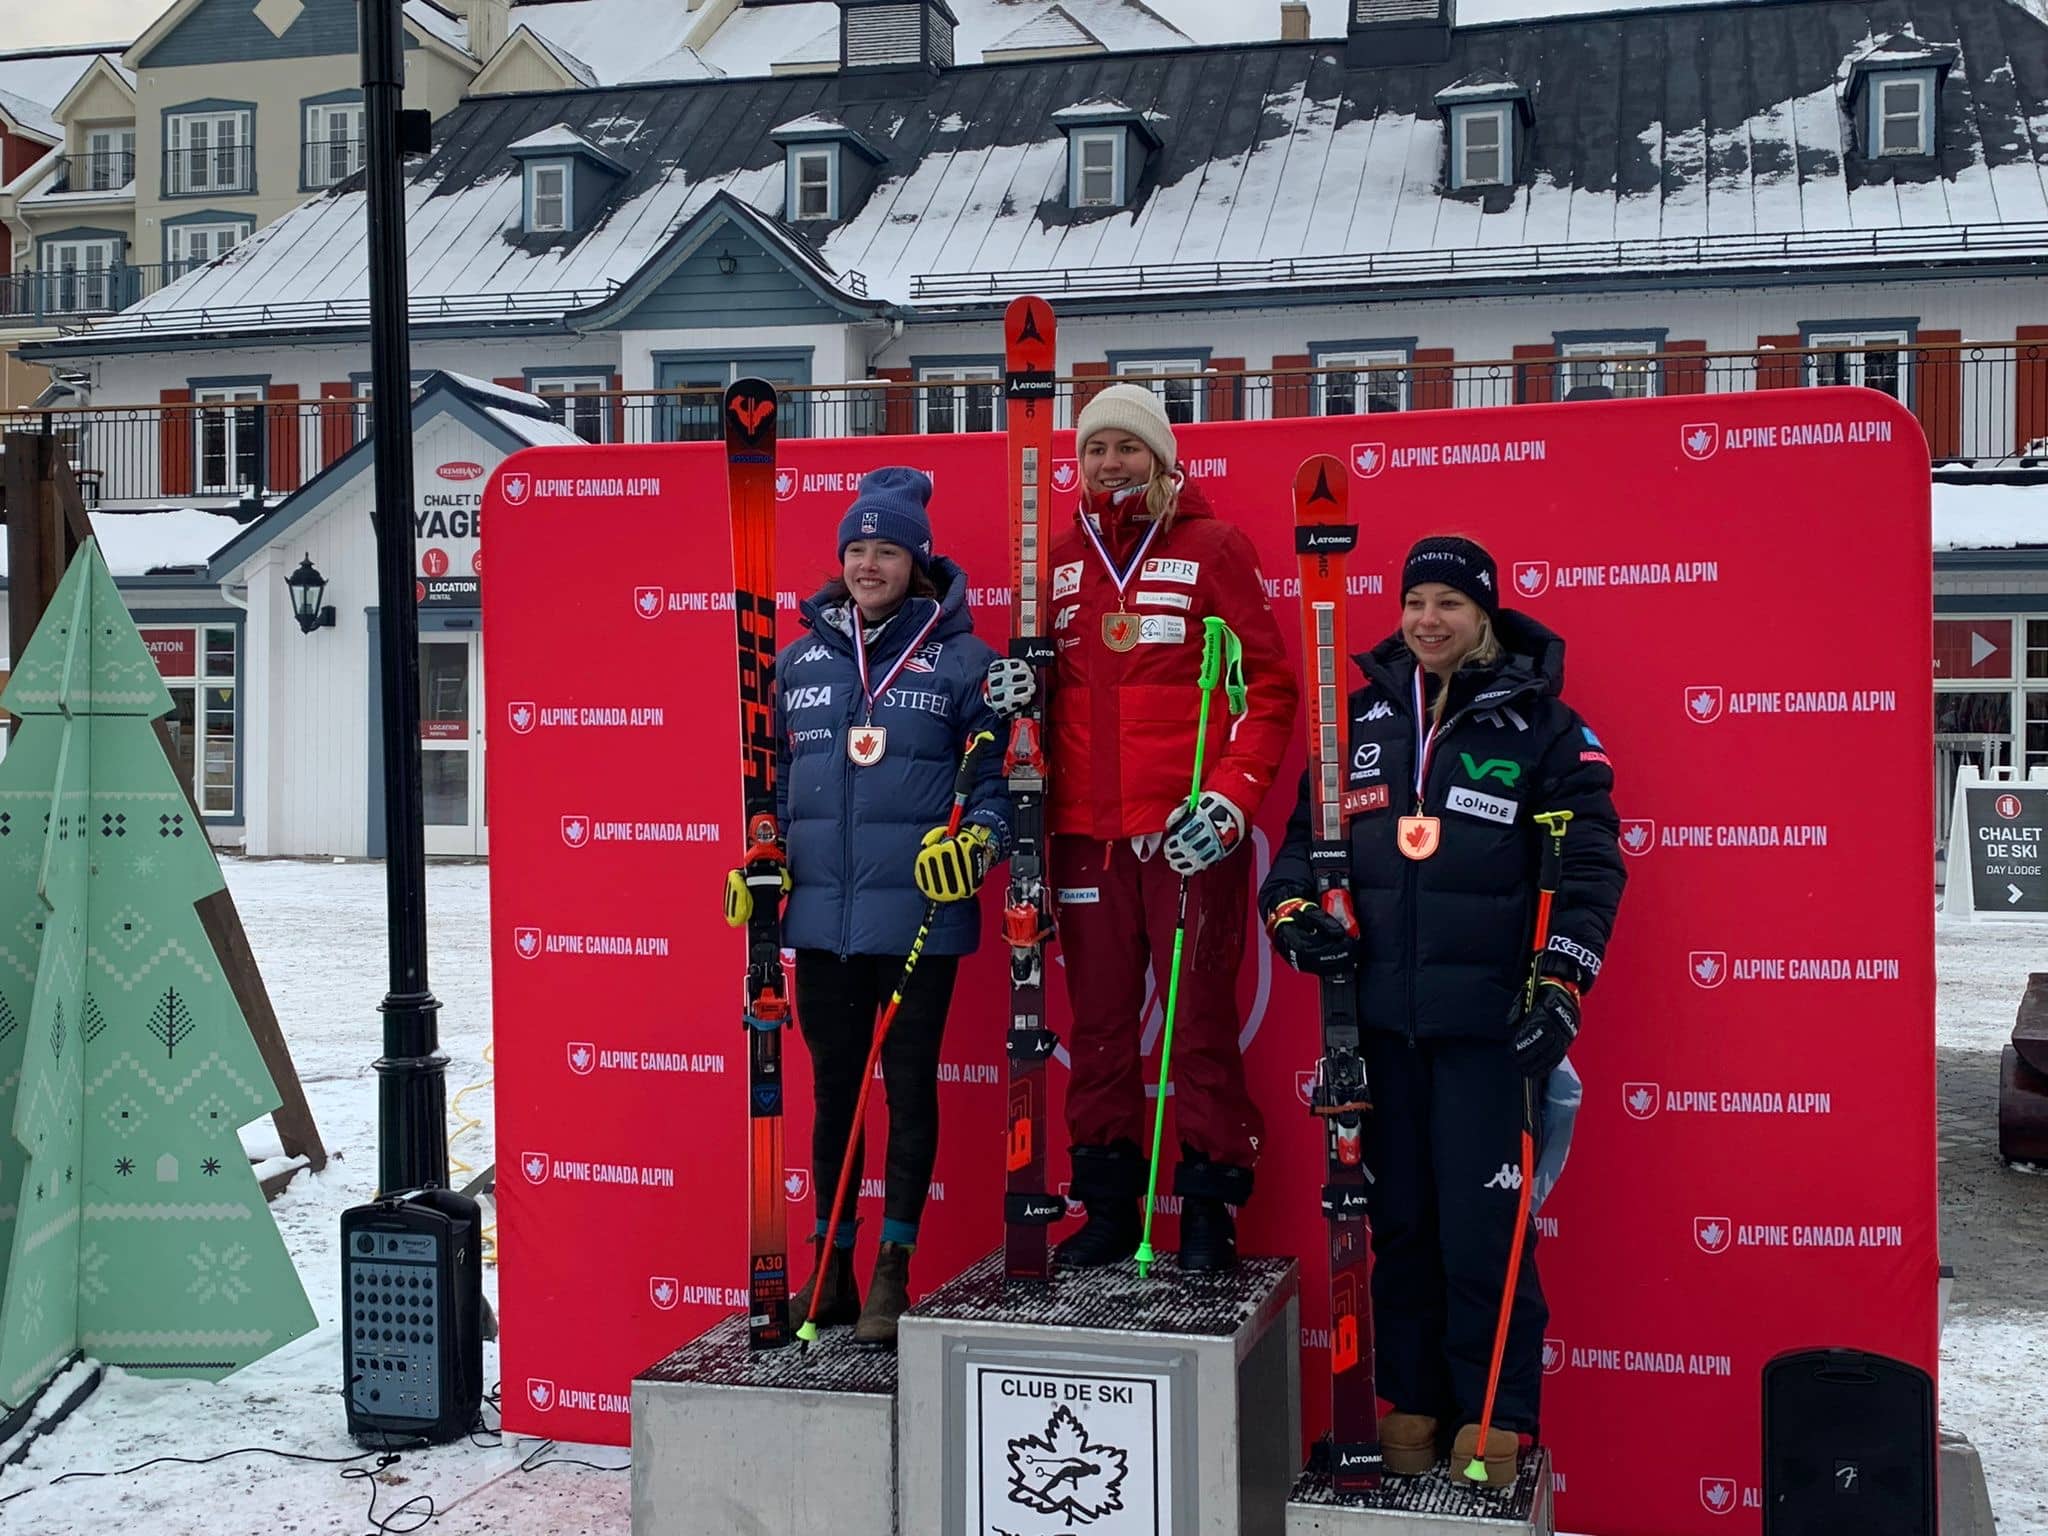 Podium from the first day of NorAm giant slalom in Tremblant. Magdalena Luczak (1st-place), Elisabeth Bocock (2nd), Erika Pykalainen (3rd). Credit: Leslie Firstbrook